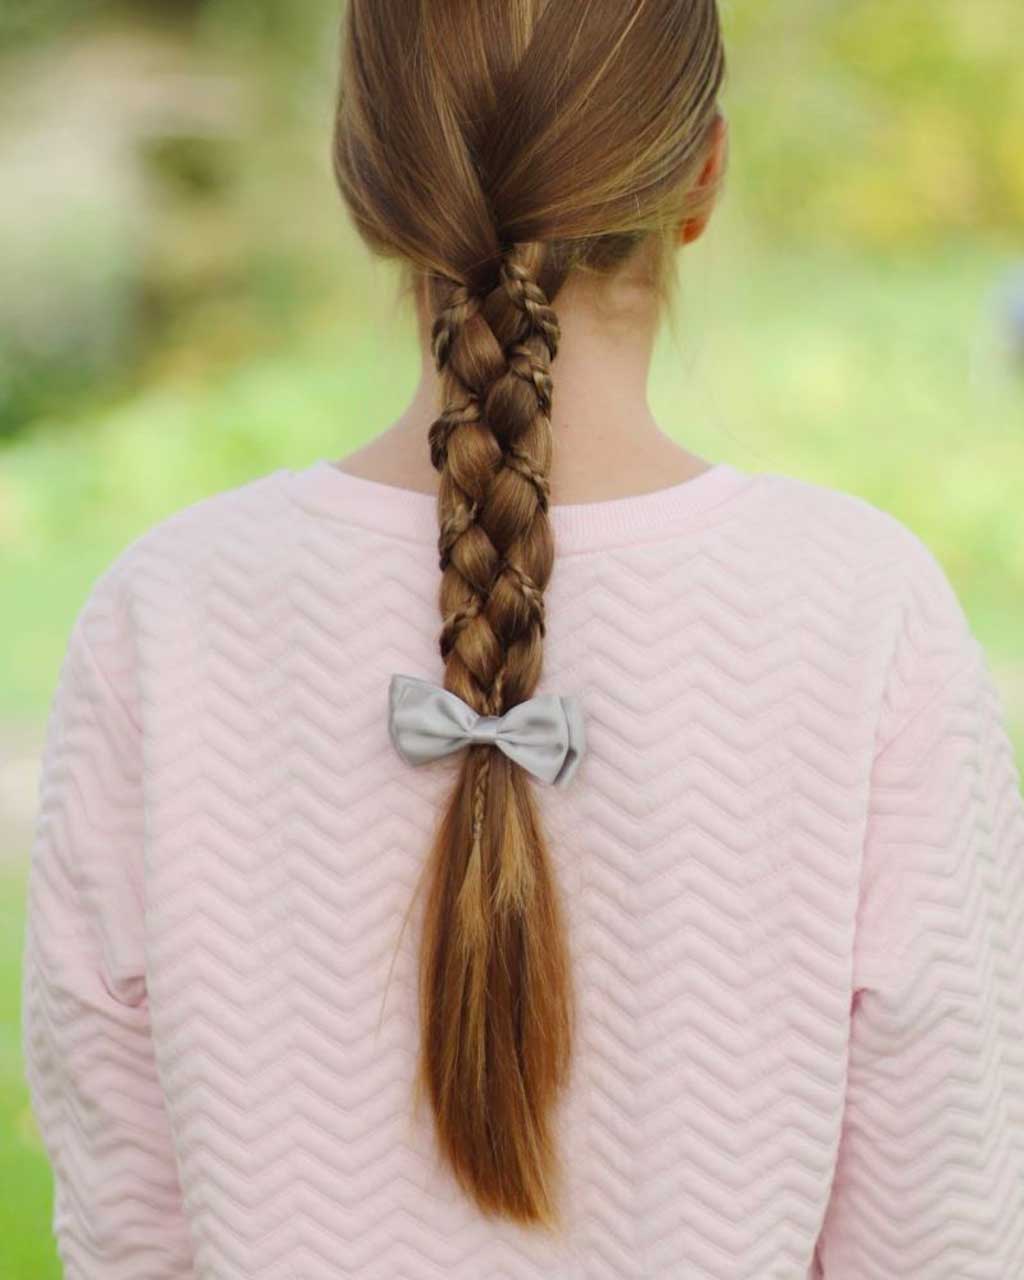 Back to School Hairstyles - The braid